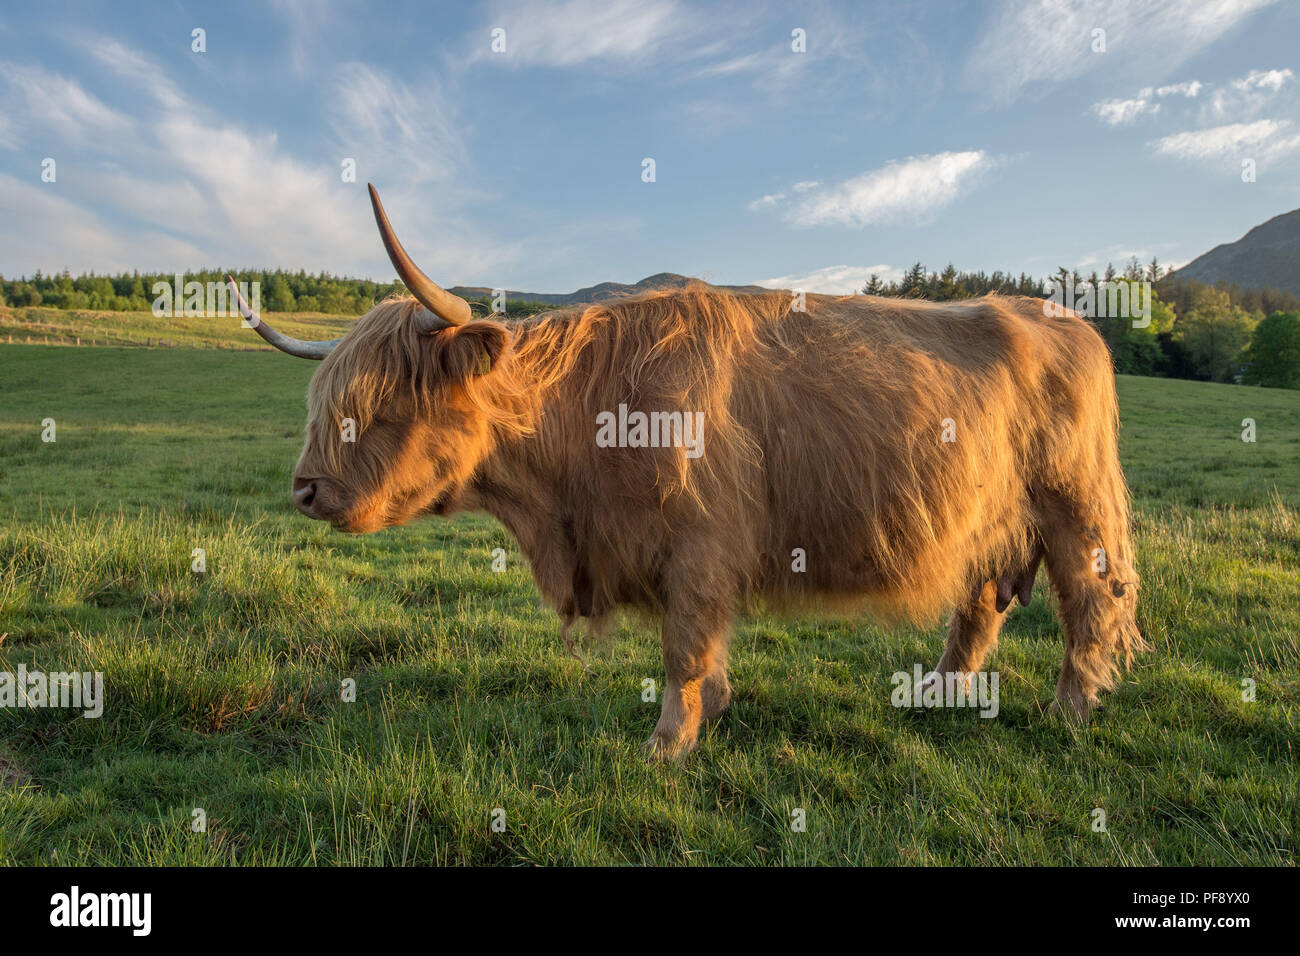 Highland Cow in evening sunlight, Trossachs, Scotland. 26th May 2018 Stock Photo